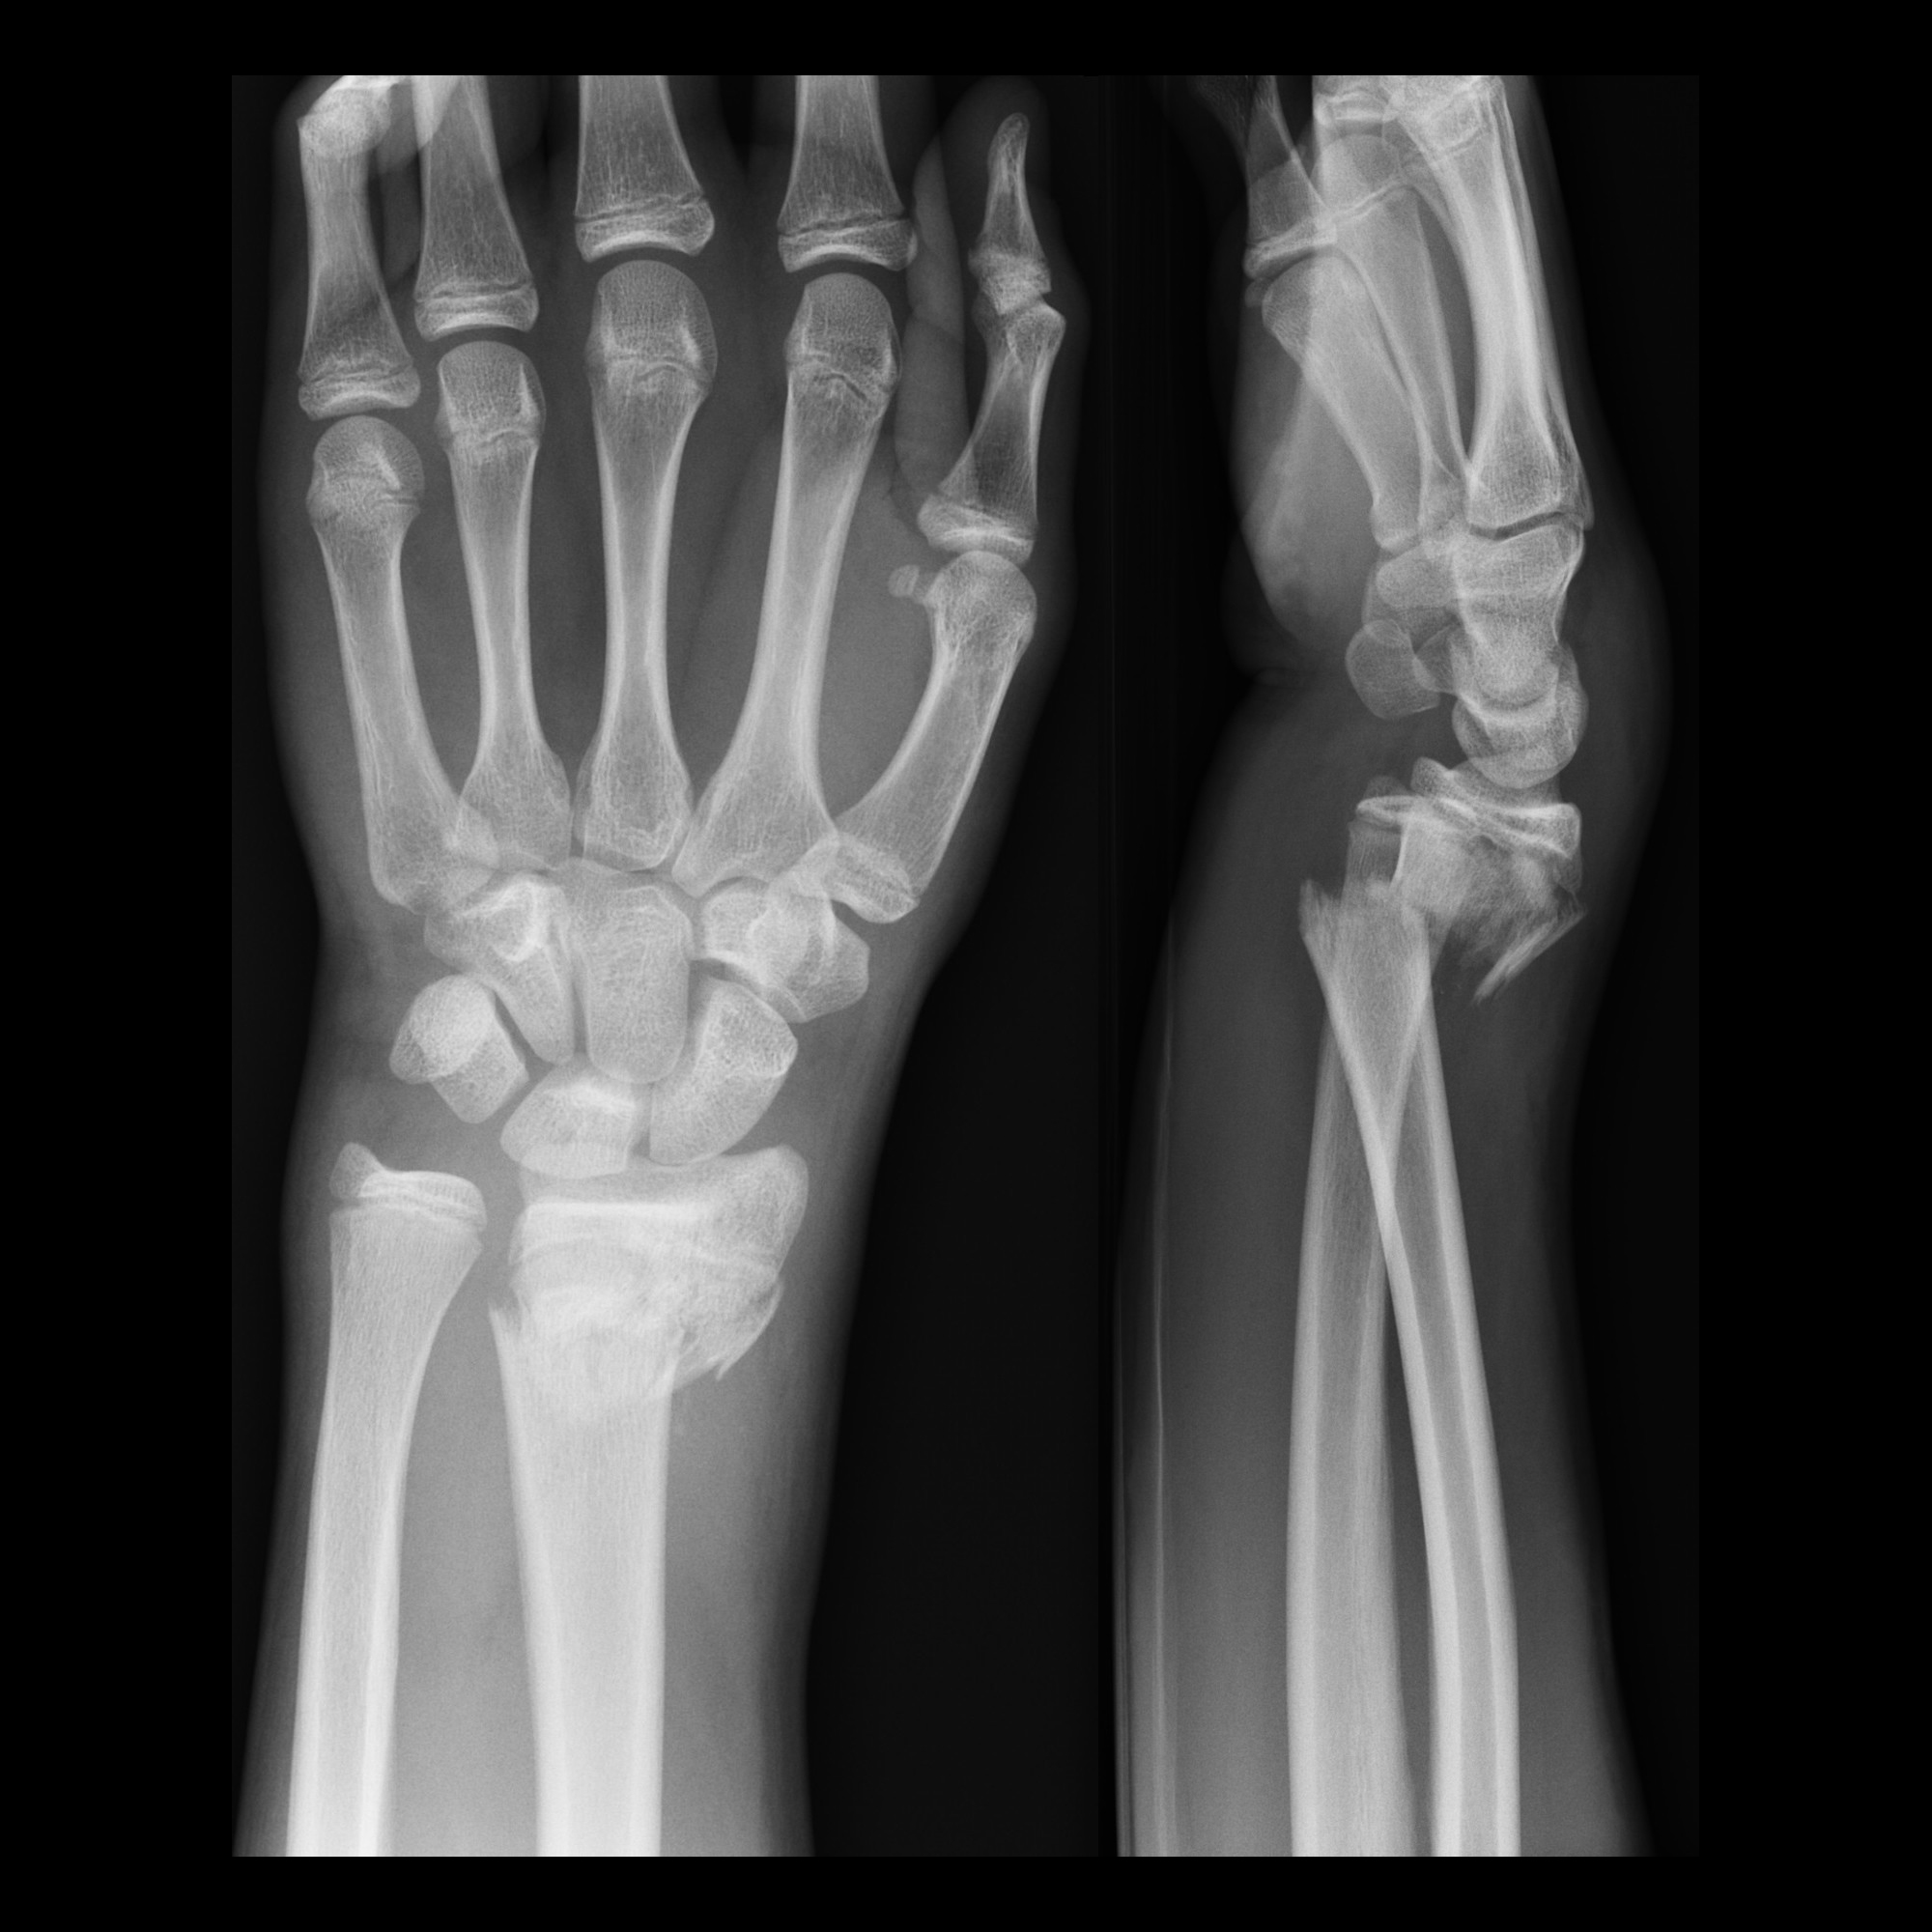 smith fracture